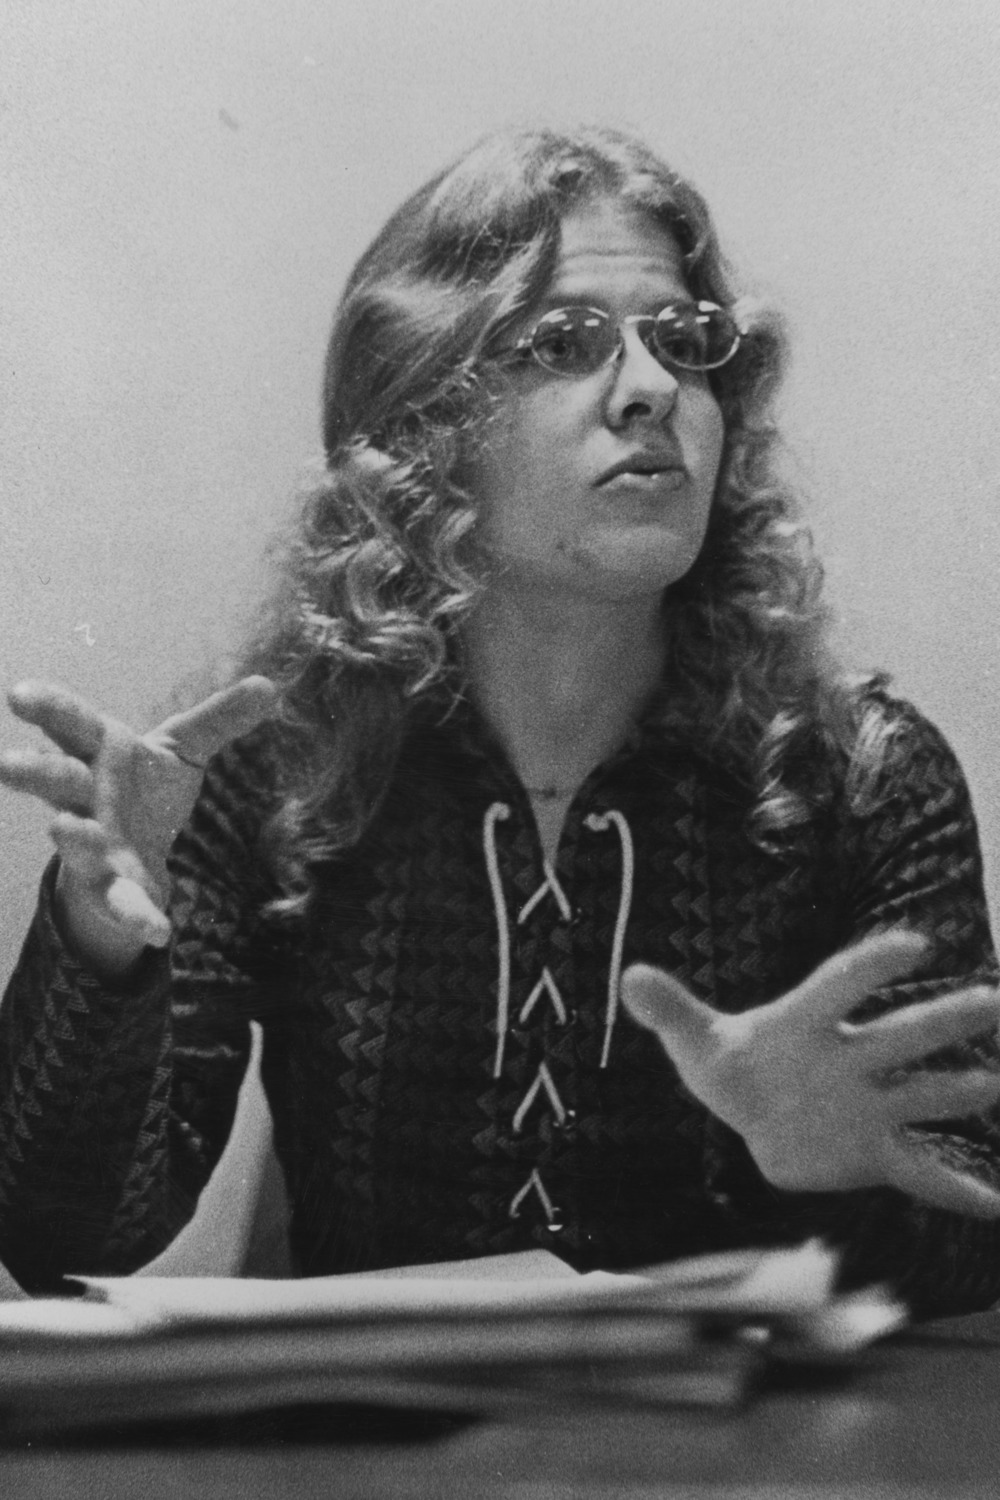 NC State University Student Body President Cathy Sterling, ca. 1971